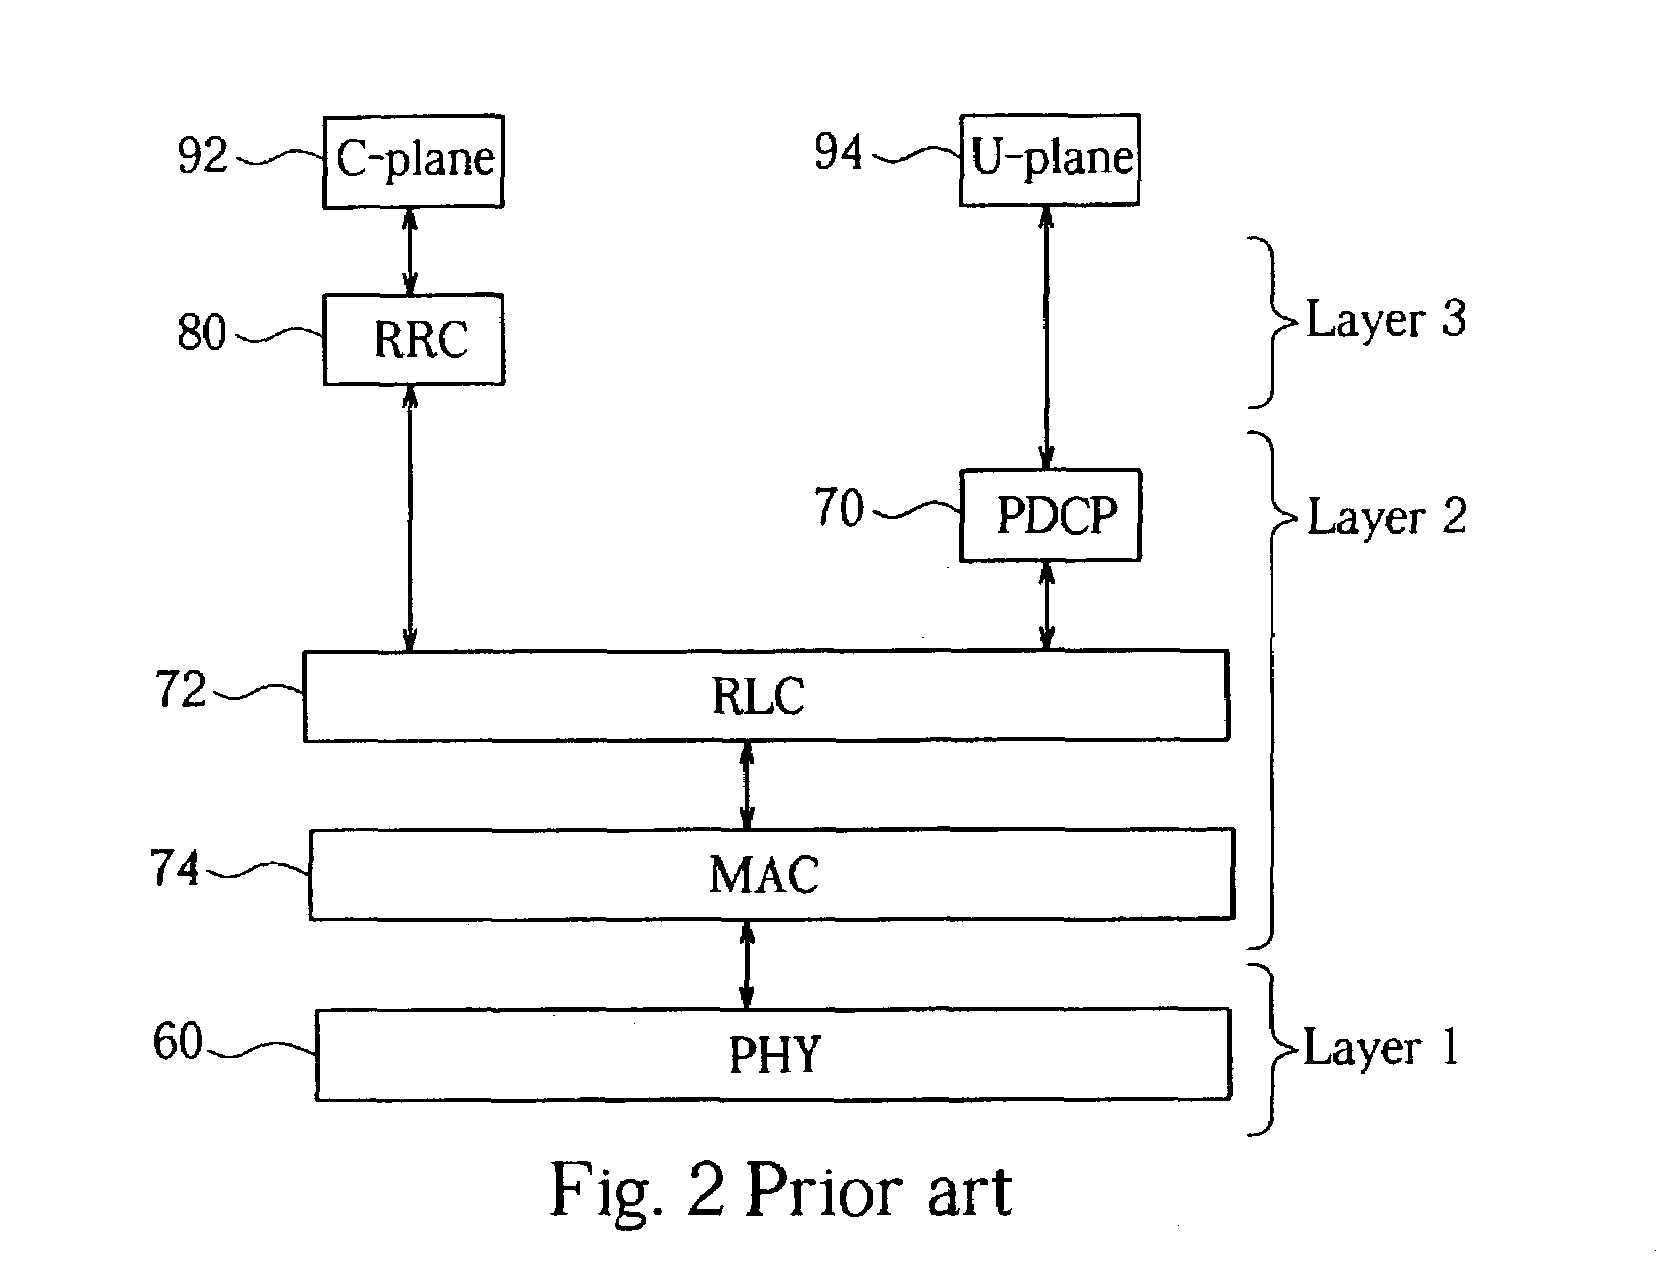 Method for determining triggering of a PDCP sequence number synchronization procedure